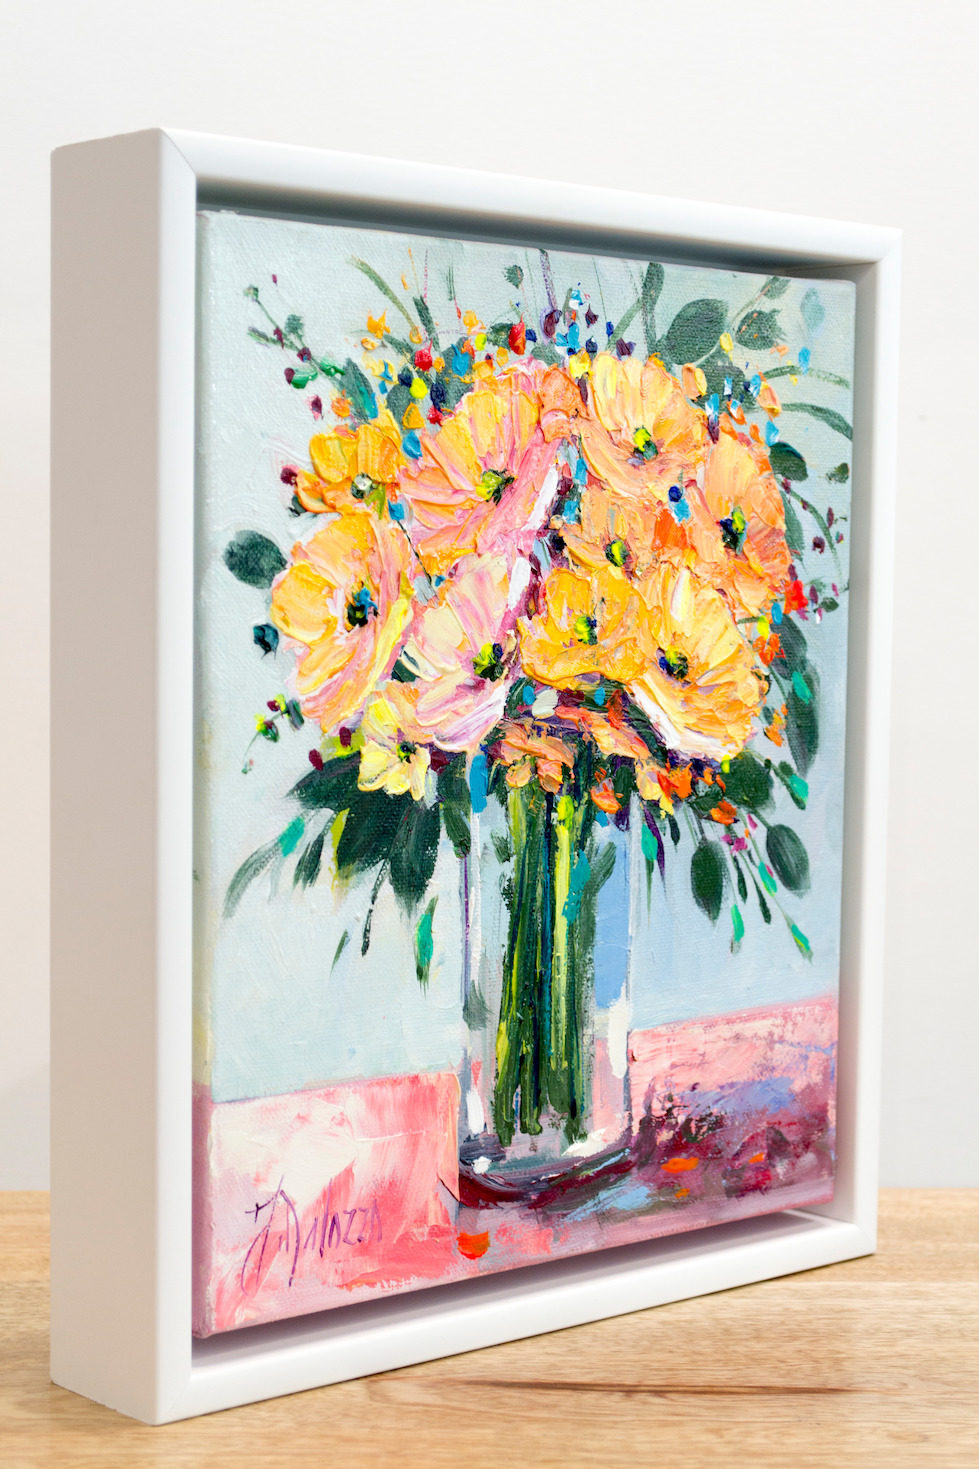 Framed Side View Of Still Life Painting "Daydreaming Bouquet" By Judith Dalozzo